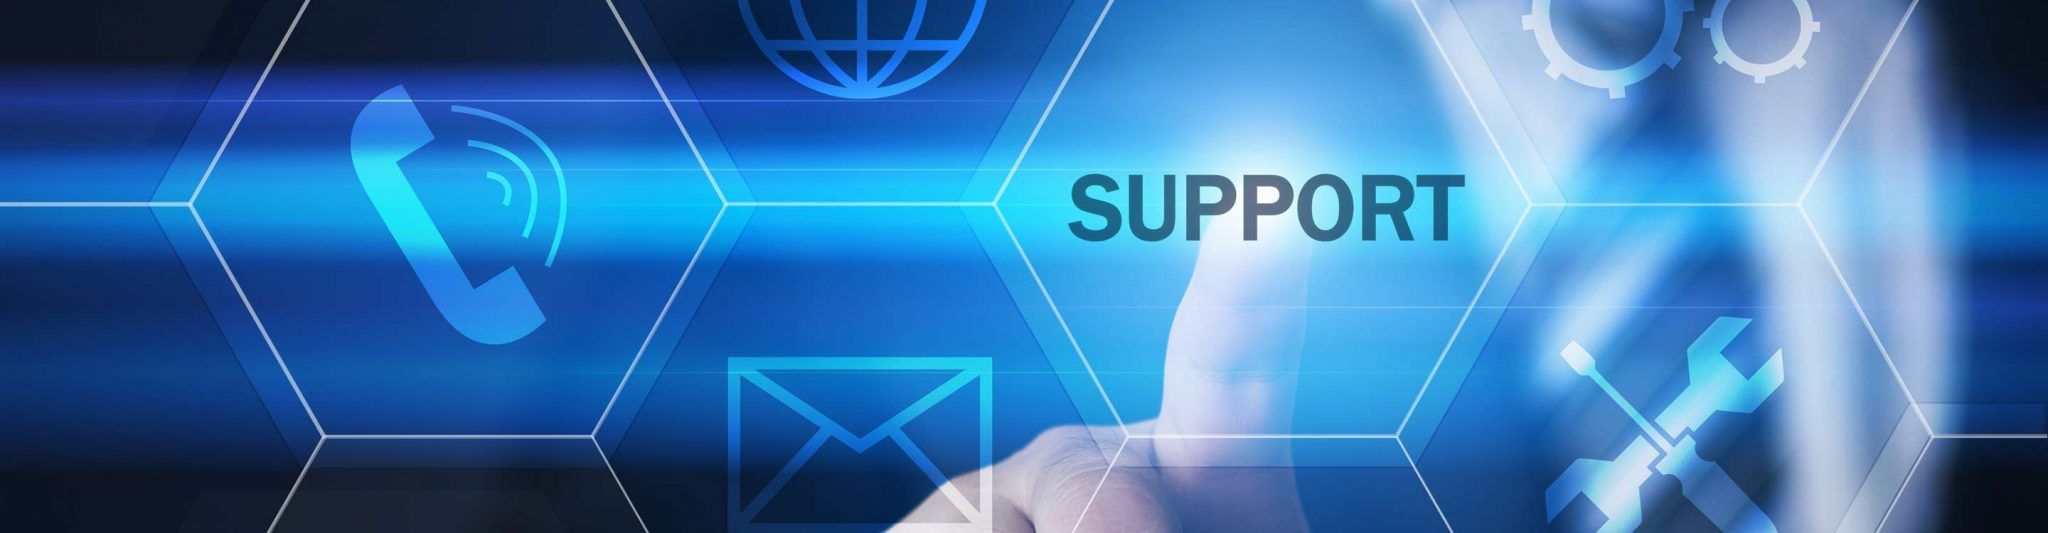 support g - Support